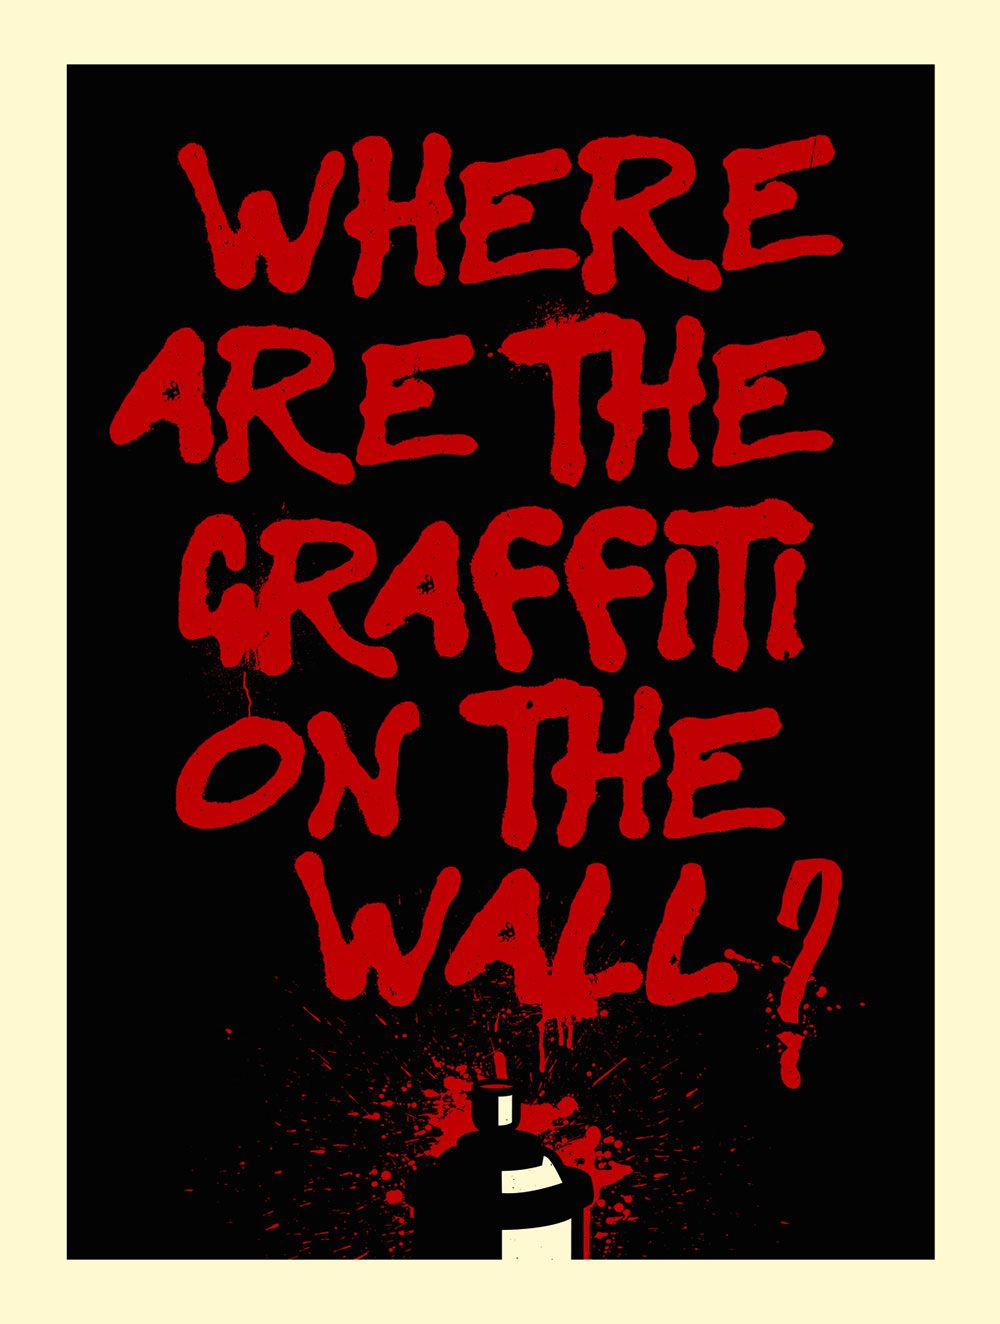 Where are the graffiti on the wall?